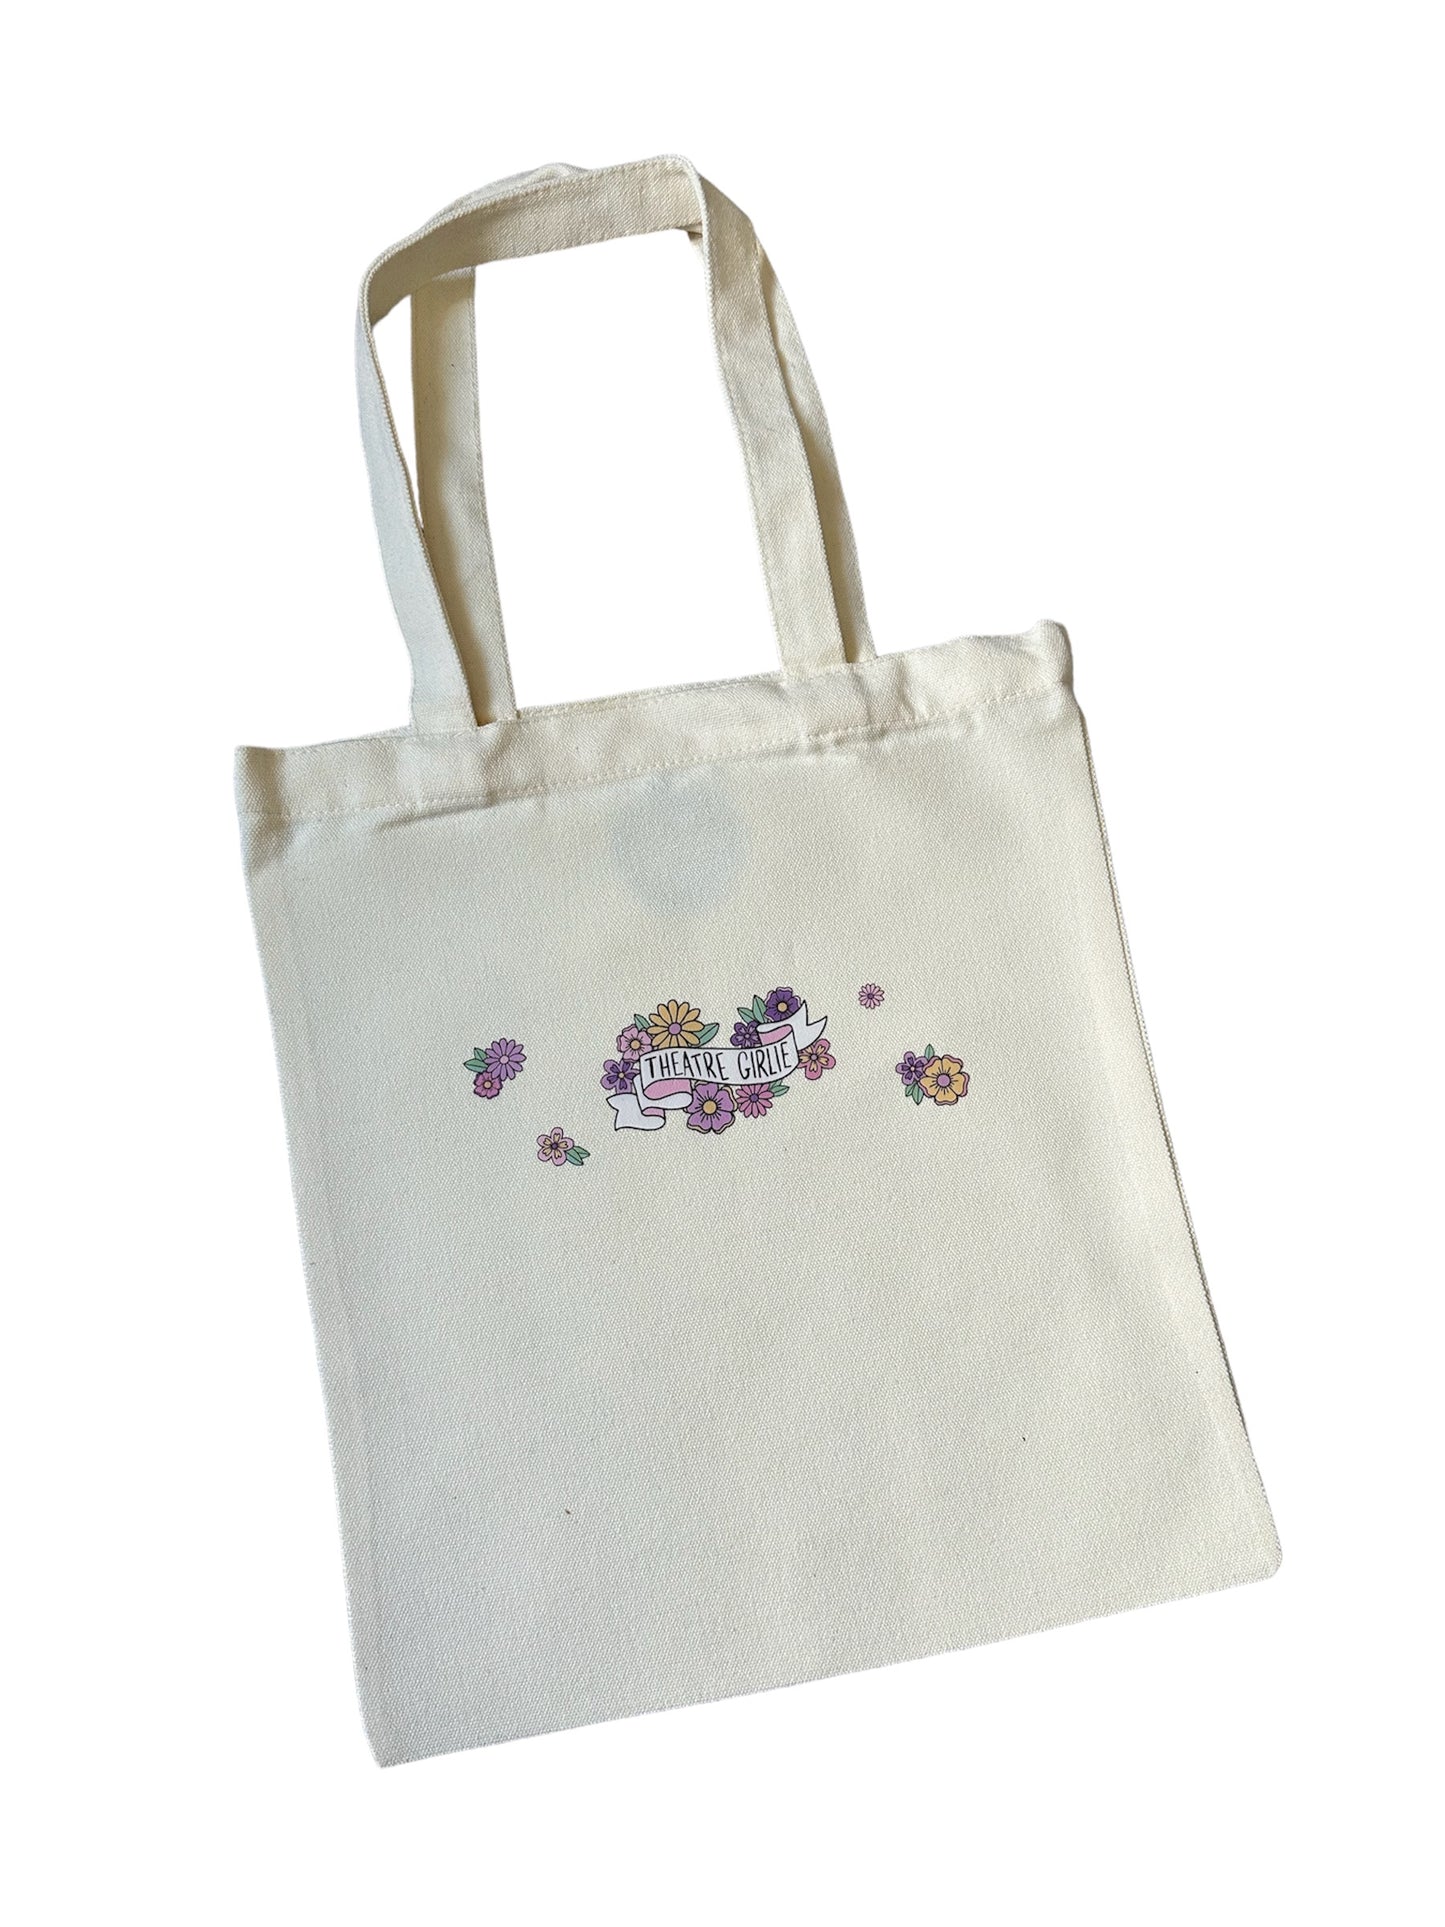 Theatre Girlie Canvas Tote Bag